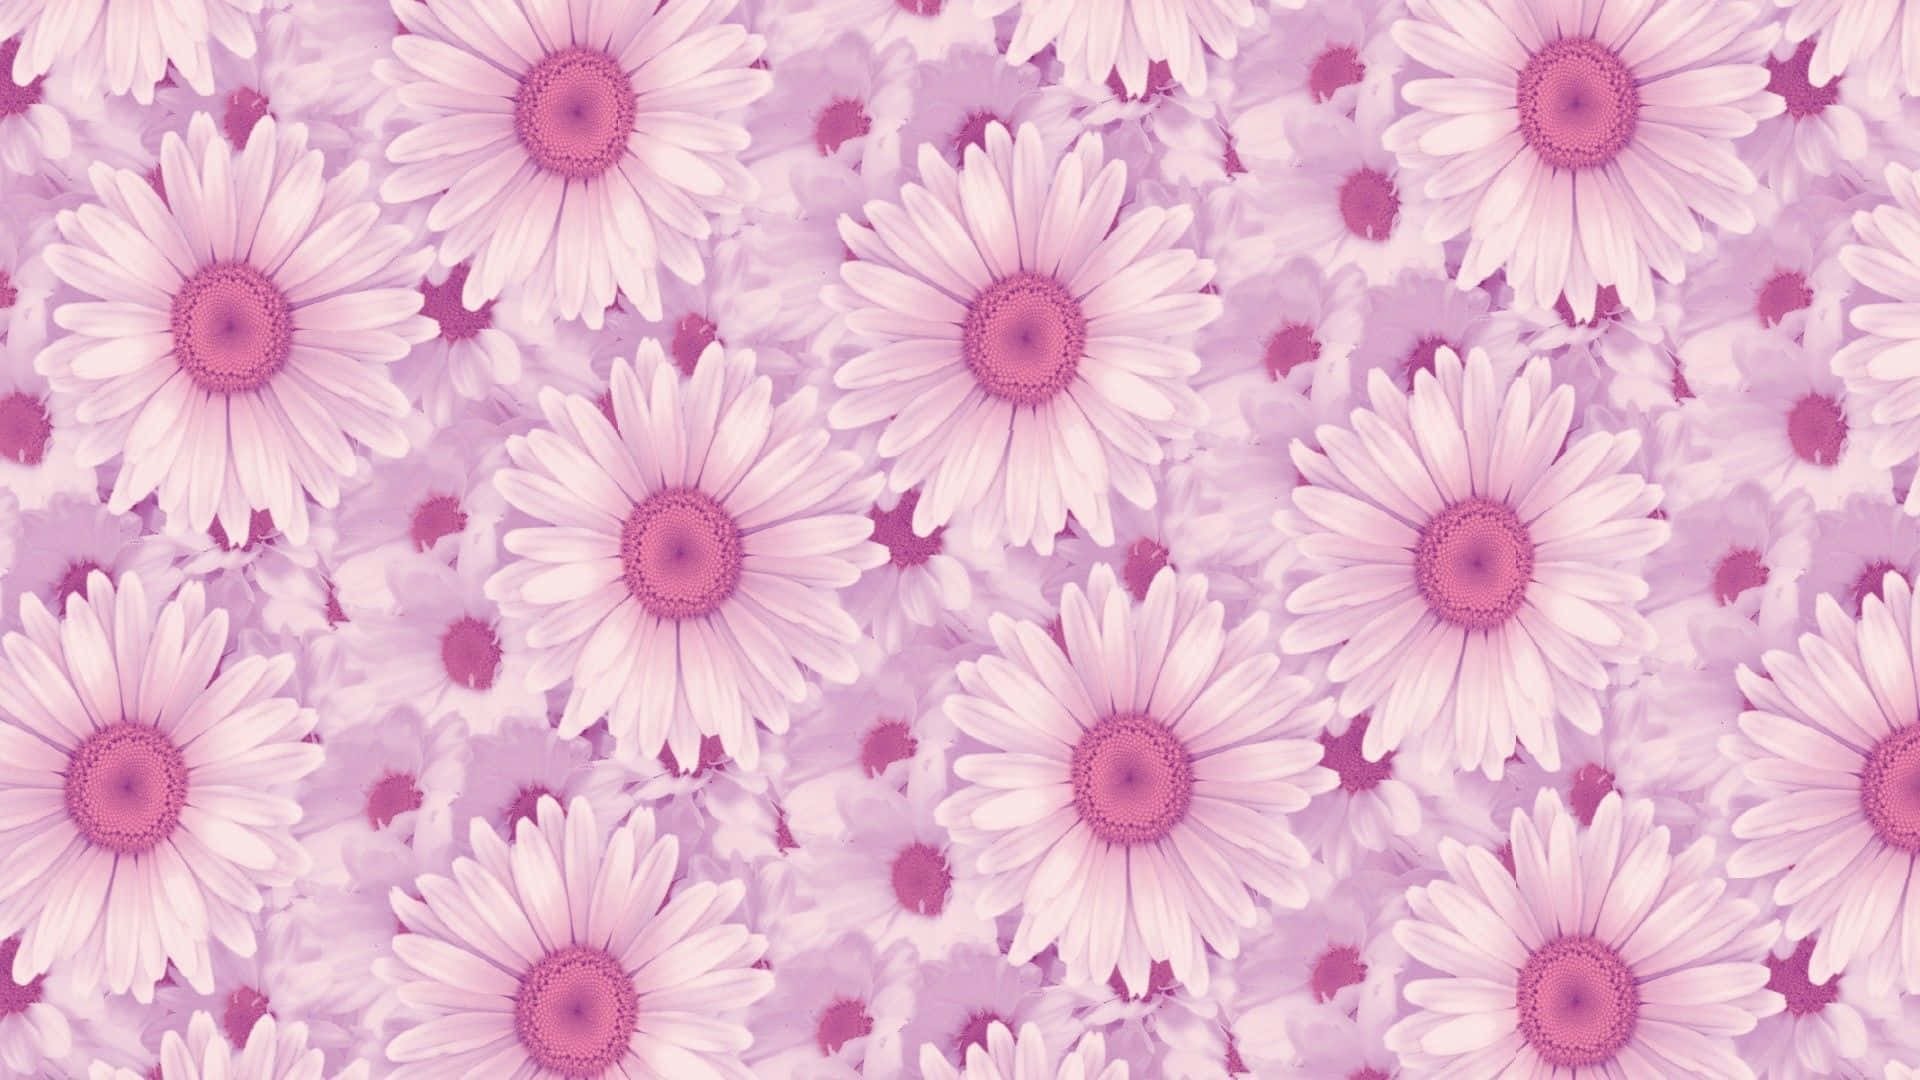 Pink Daisy Aesthetic Computer Wallpaper